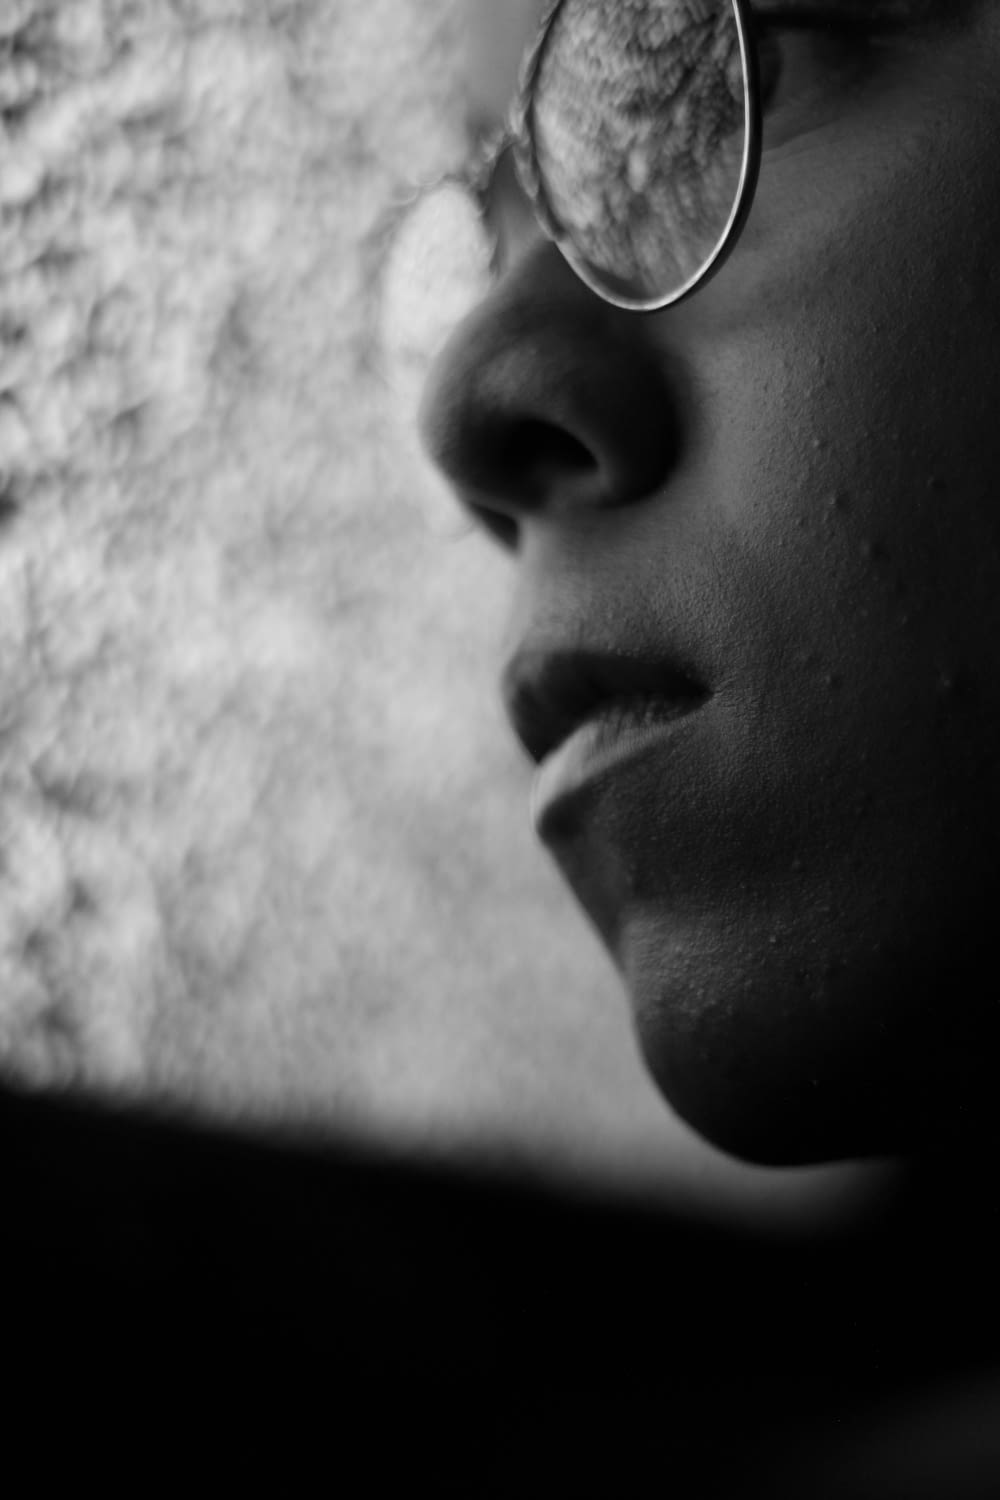 grayscale photo of person wearing eyeglasses looking at glass